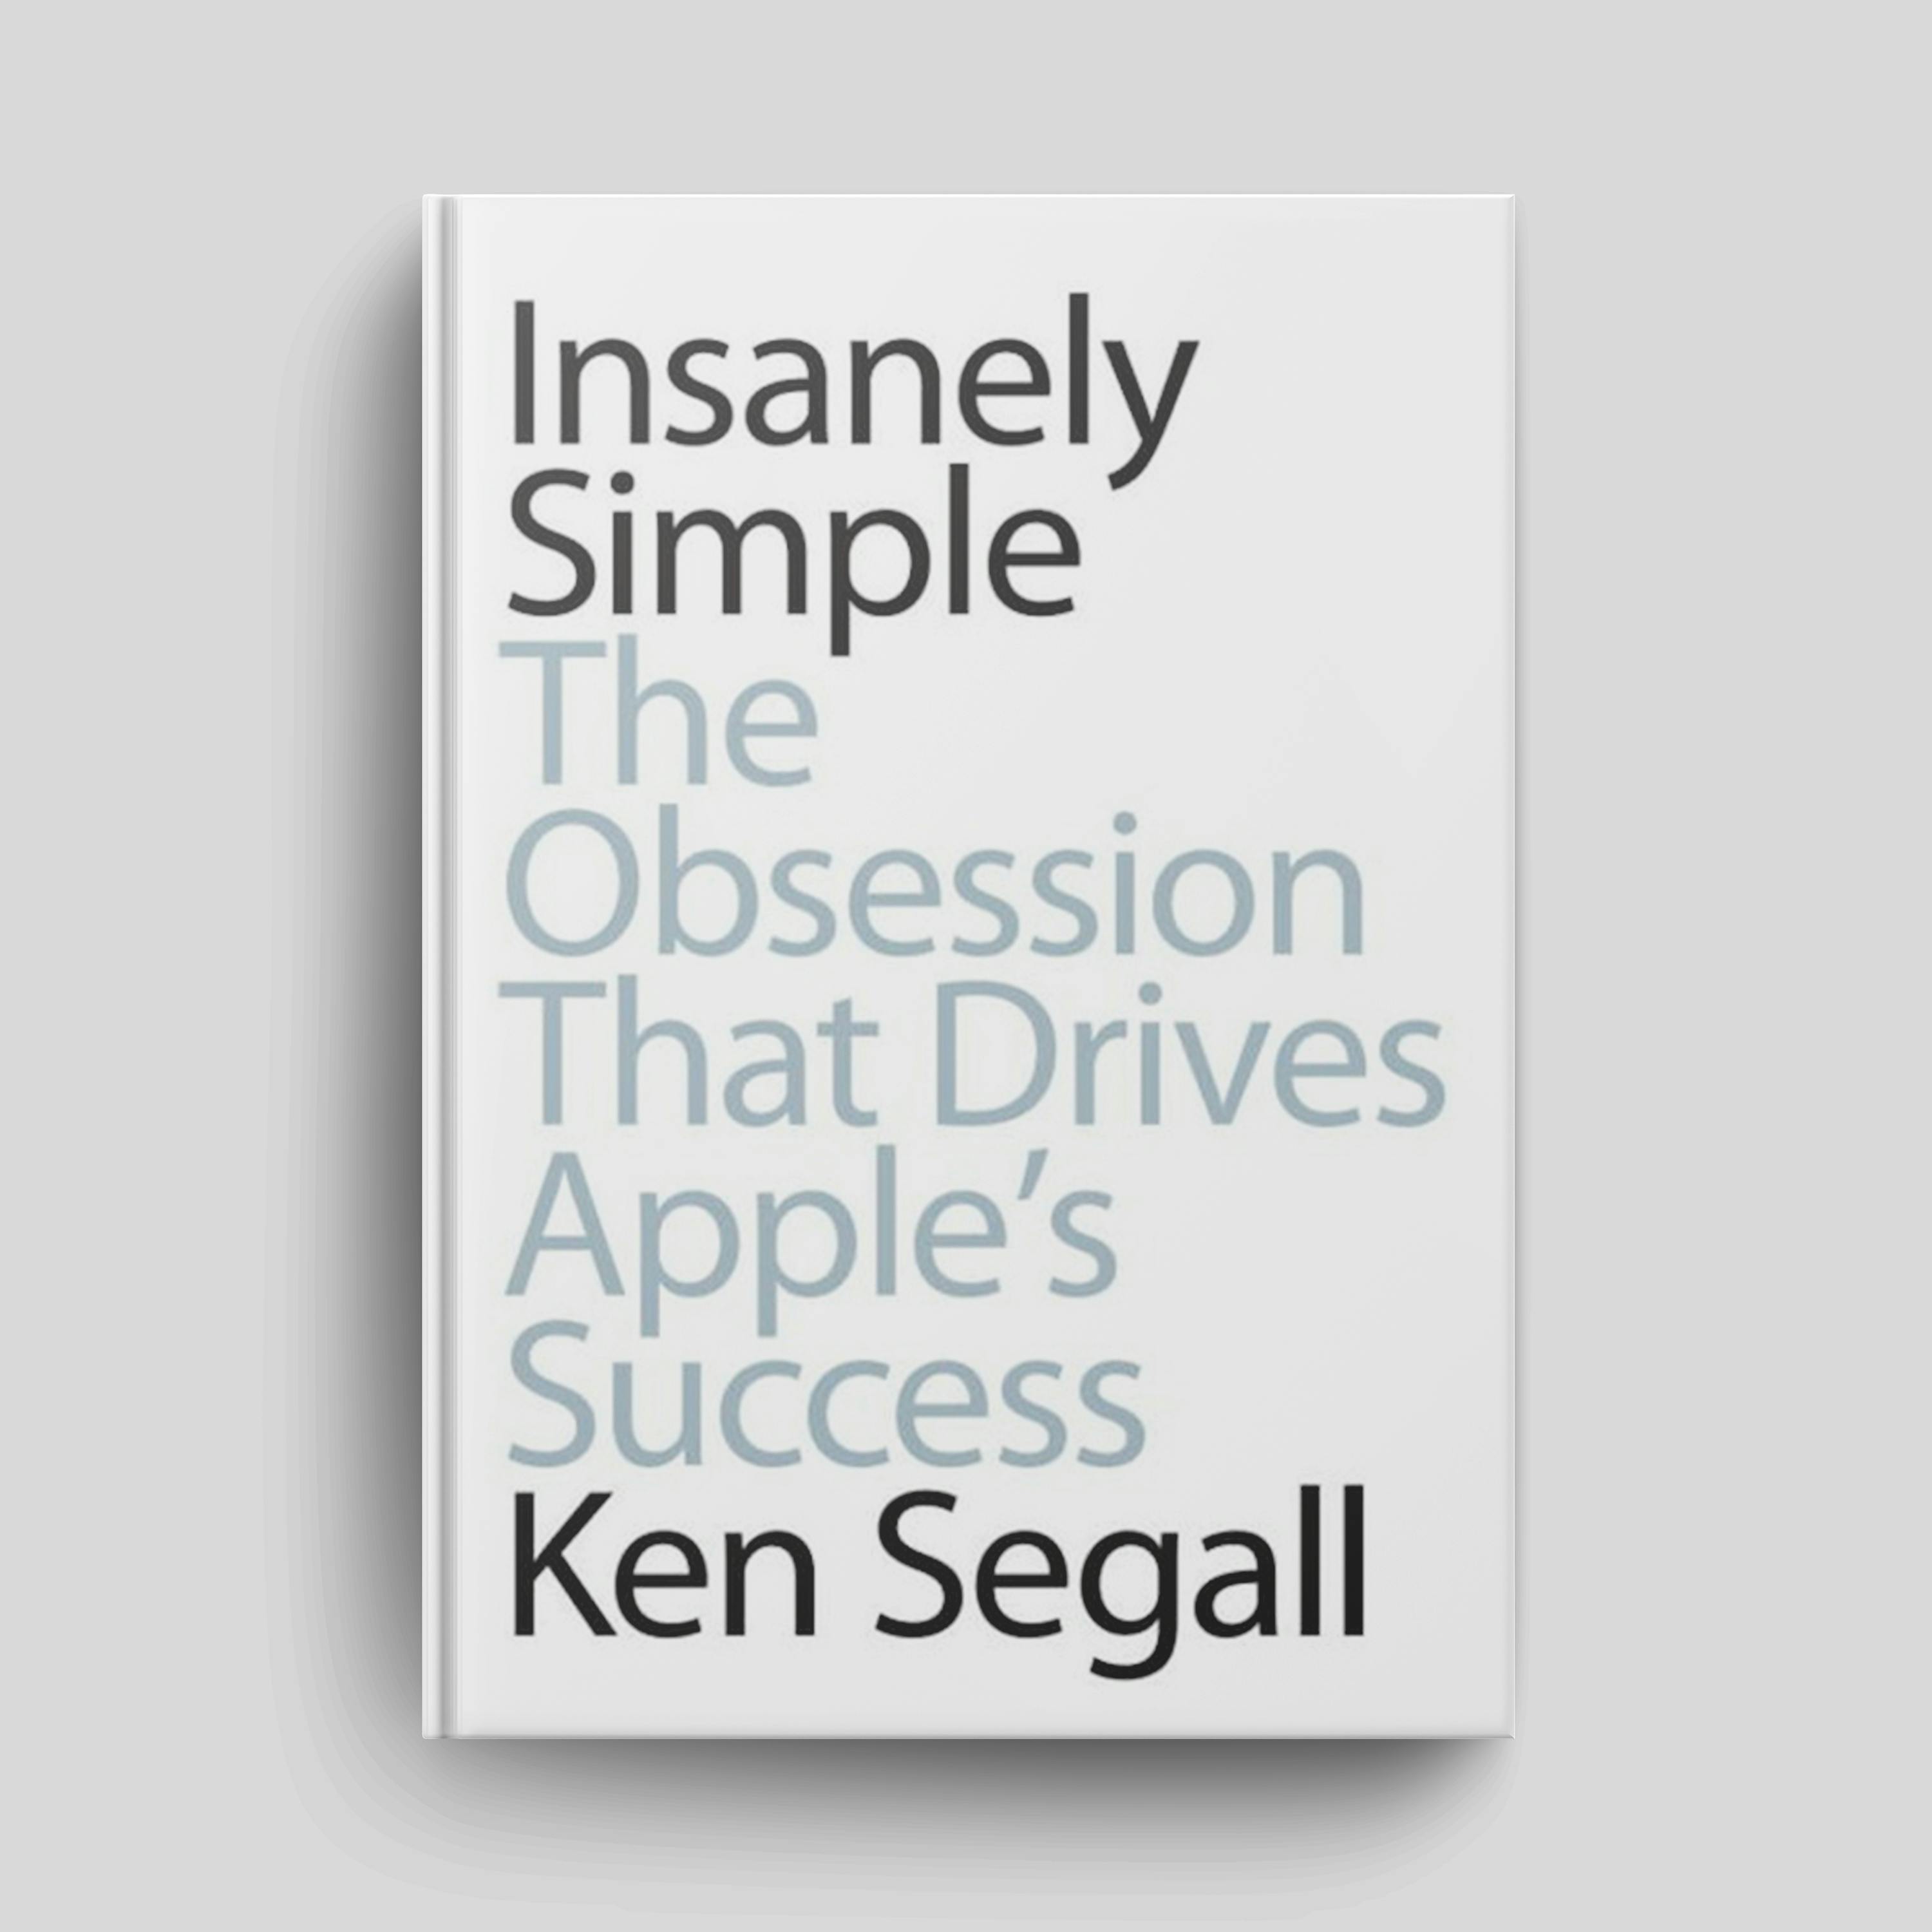 Trailer - Book: (Part 2) "Insanely Simple: The Obsession That Drives Apple's Success" | Episode #175 (Part 2 of 2)